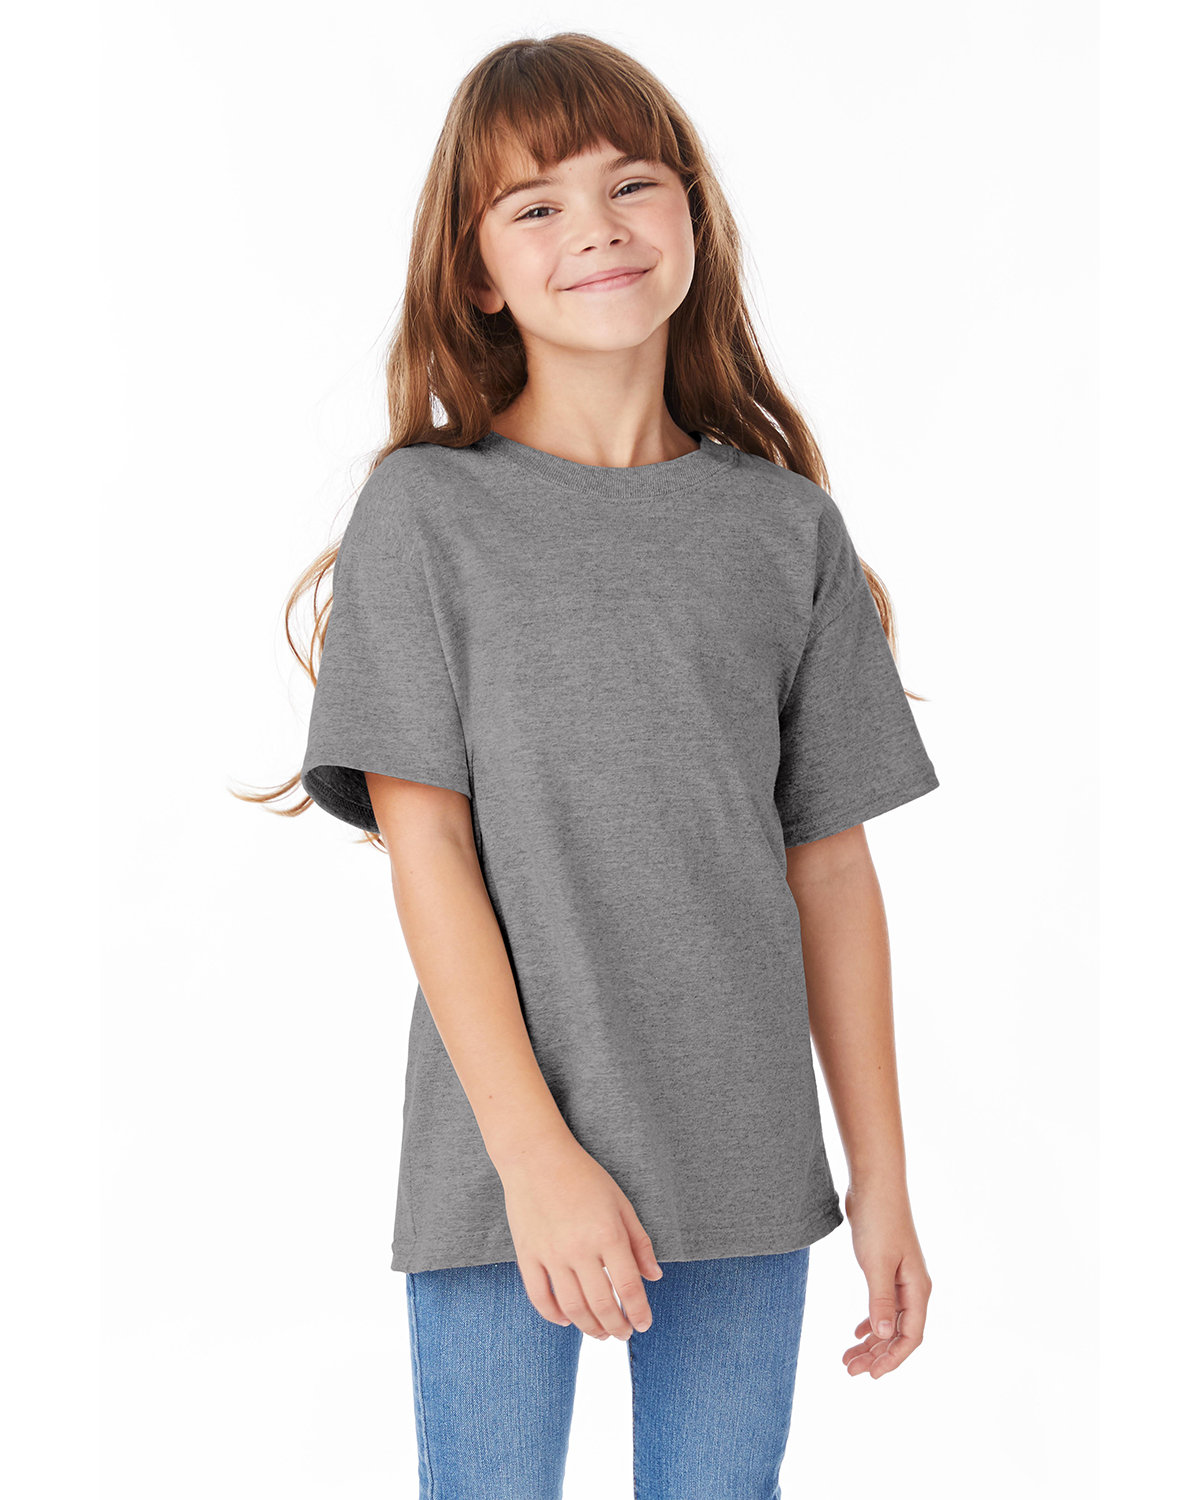 Girl's Shirt by Hanes S/P/Ch 6/6x Aqua in Color Rn 15763